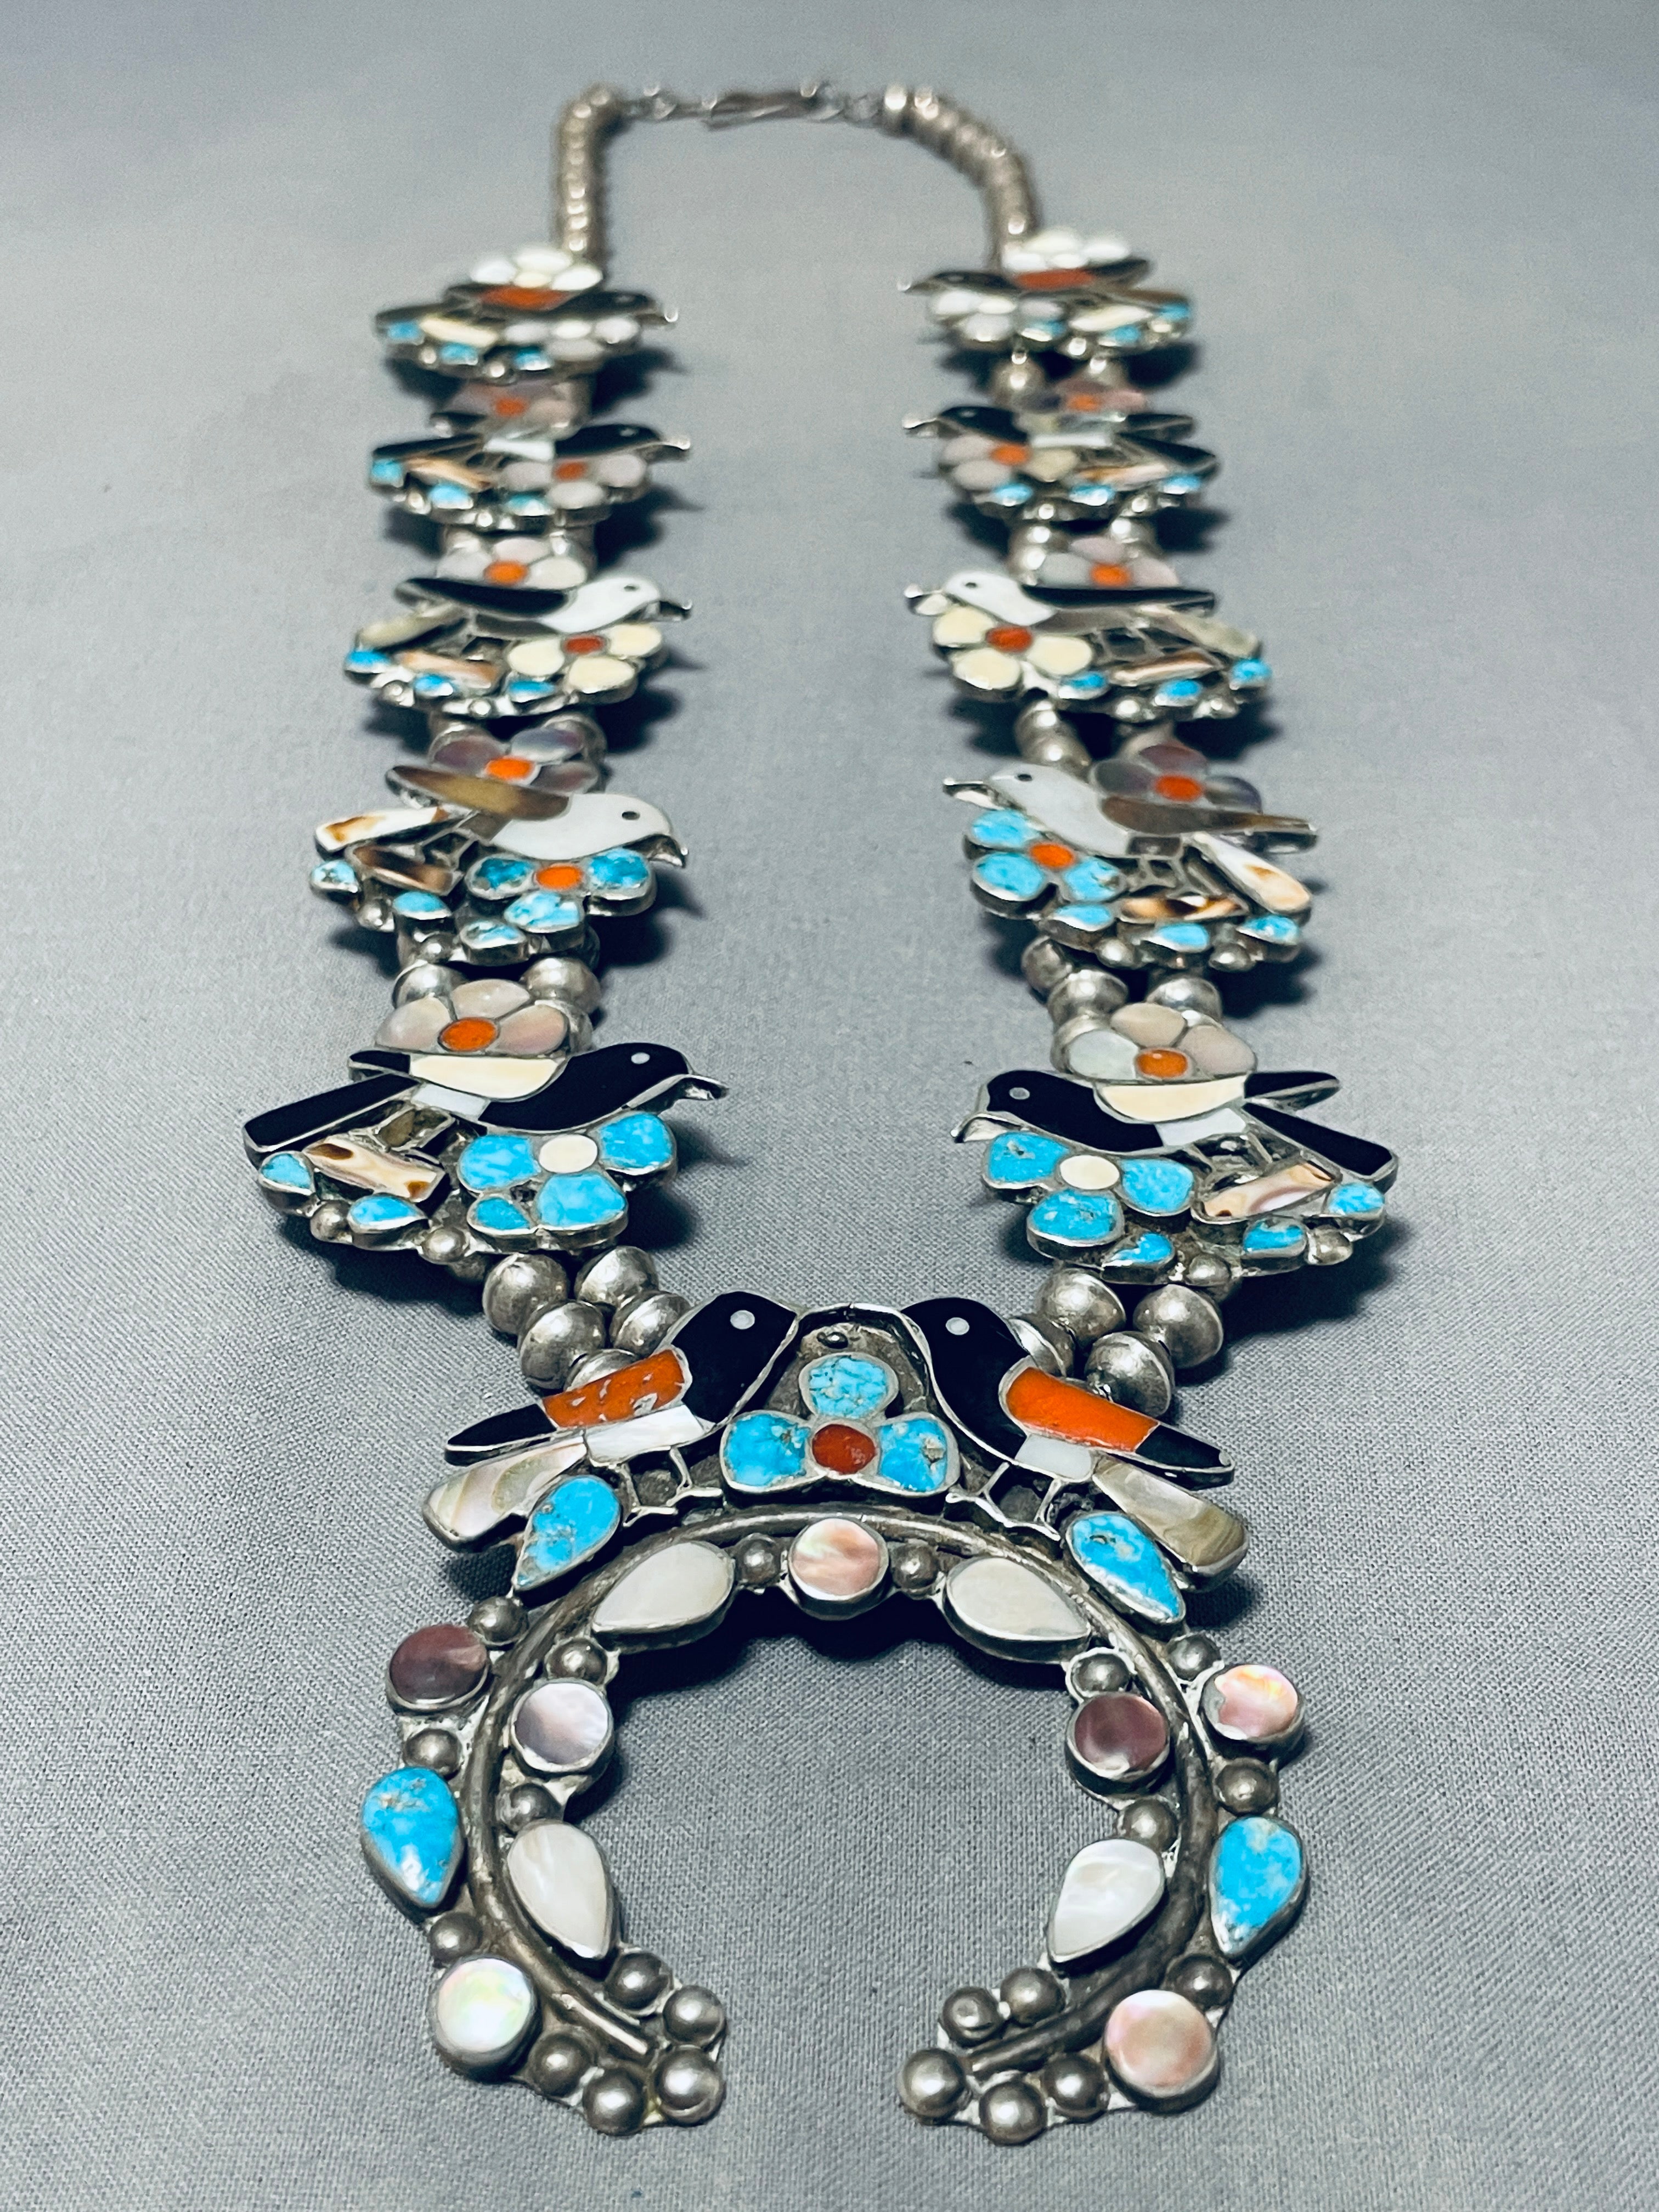 Zuni Style Squash Blossom Necklace Sunface Chief Squash Blossom - Enameled Mother-Of-Pearl, Onyx, Tortoise Shell, Turquoise and Coral